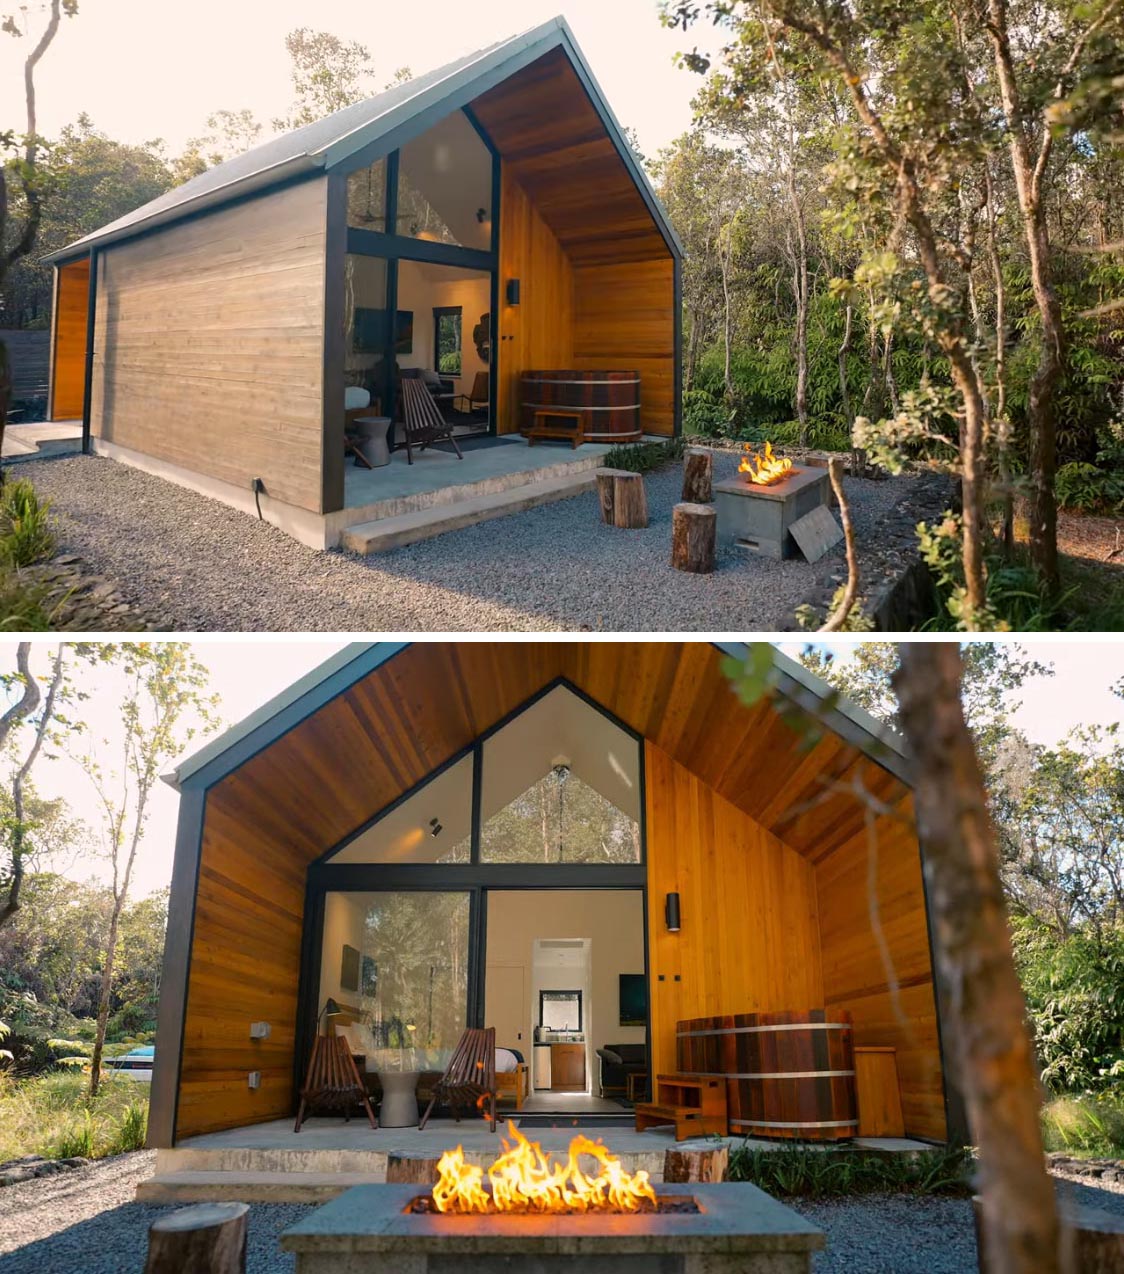 This Modern Tiny House Surrounded By A Forest In Hawaii Is A Surprising ...